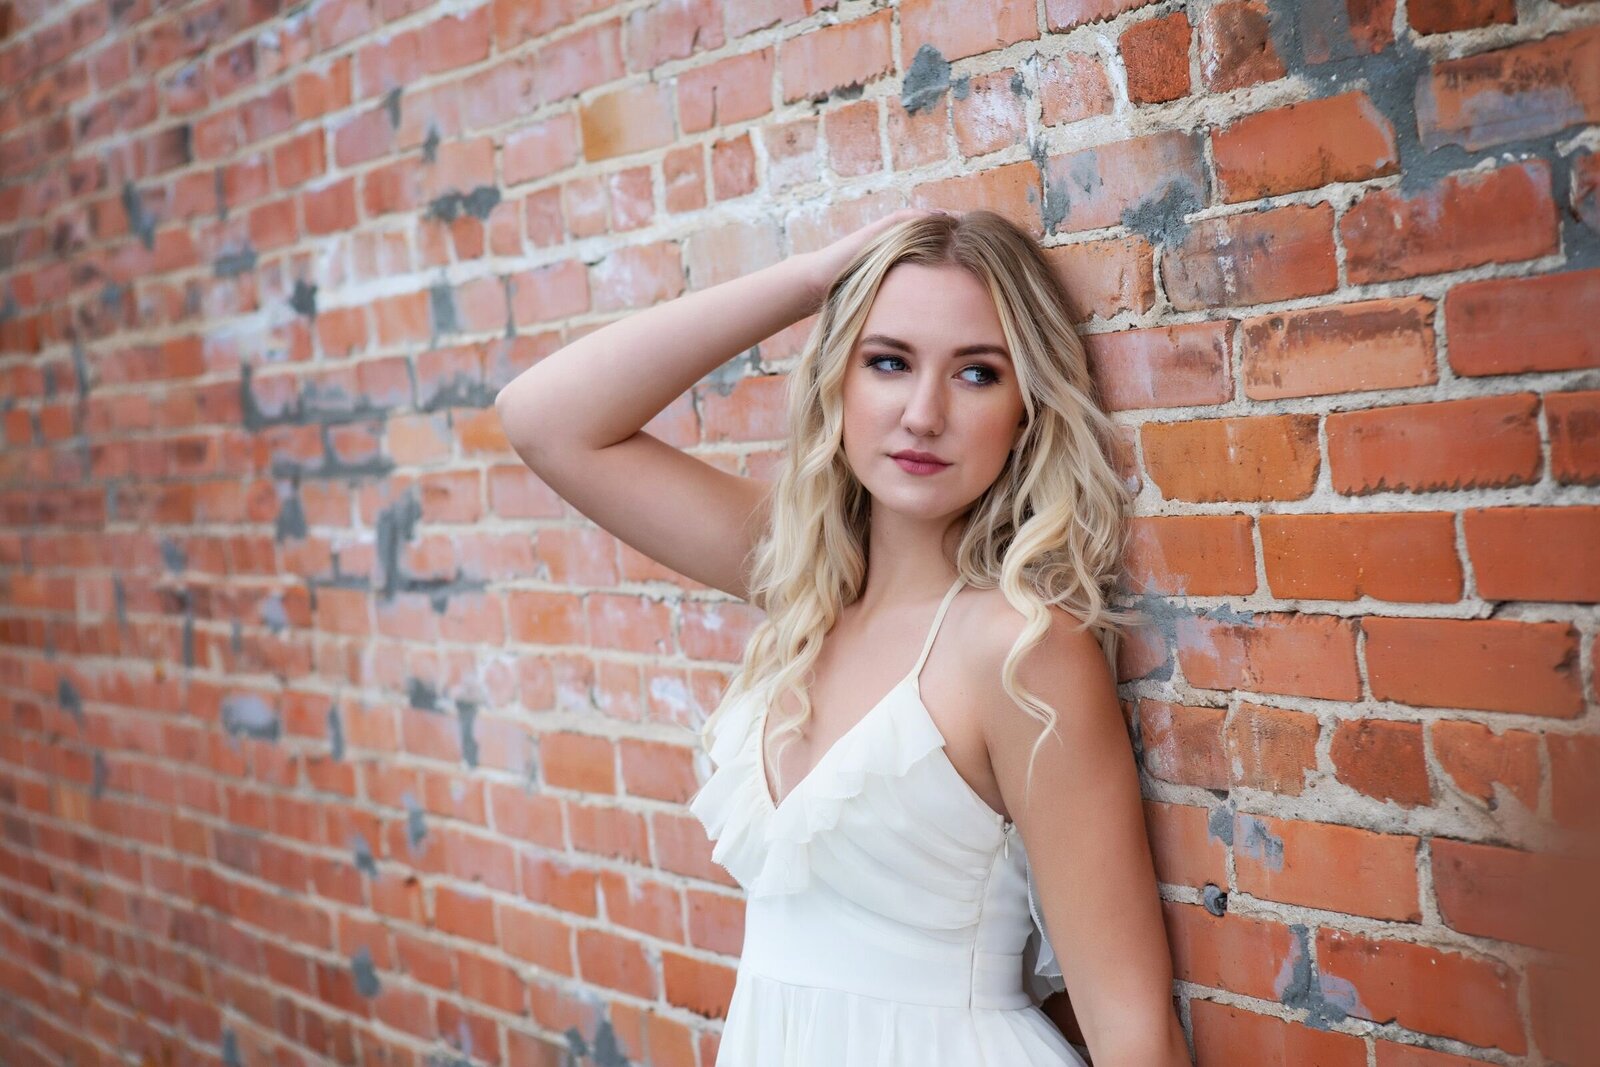 A blonde standing against a brick wall in Akeley, Minnesota wearing a white dress looking off into the distance.